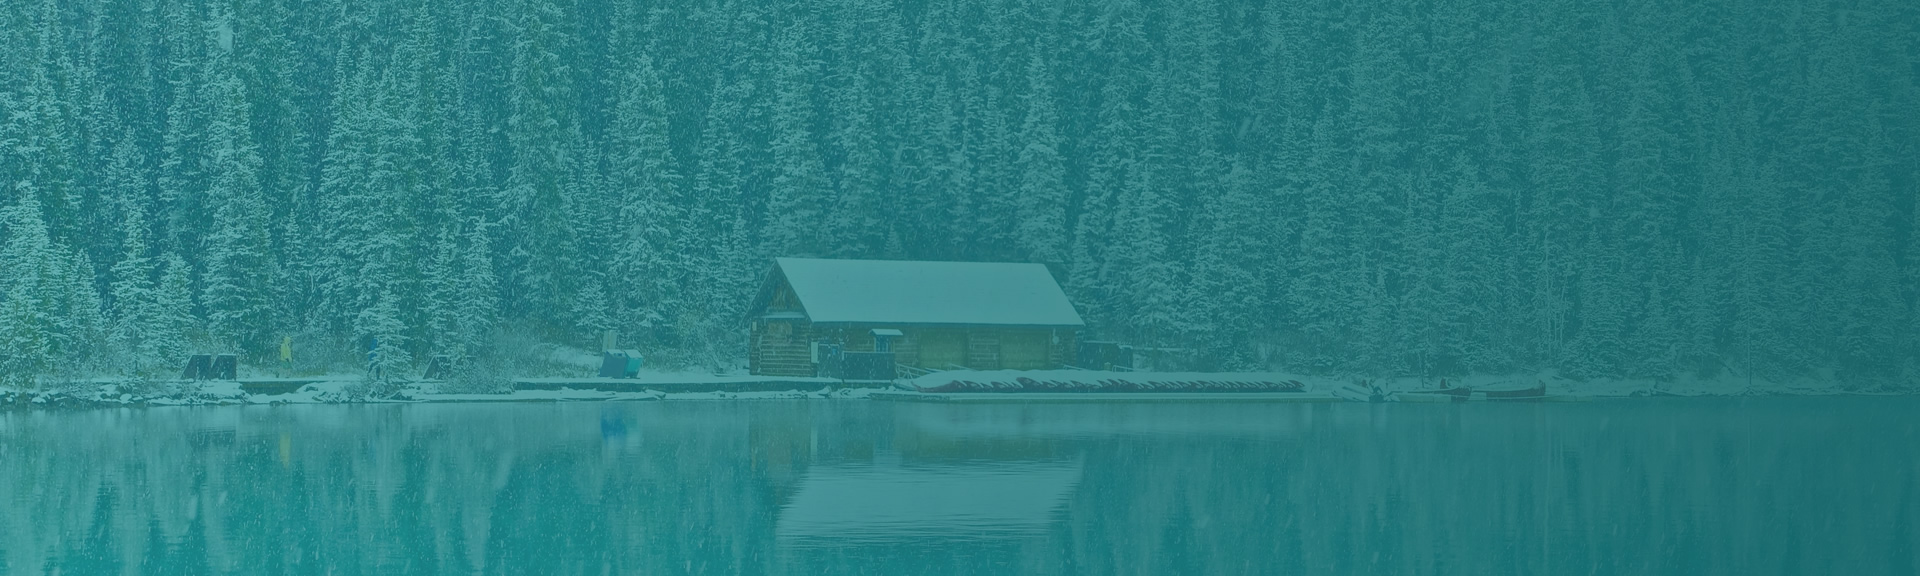 Pay Per Click Advertising Services - Cabin in the Woods, on the Lake - Background Image | Digital C4